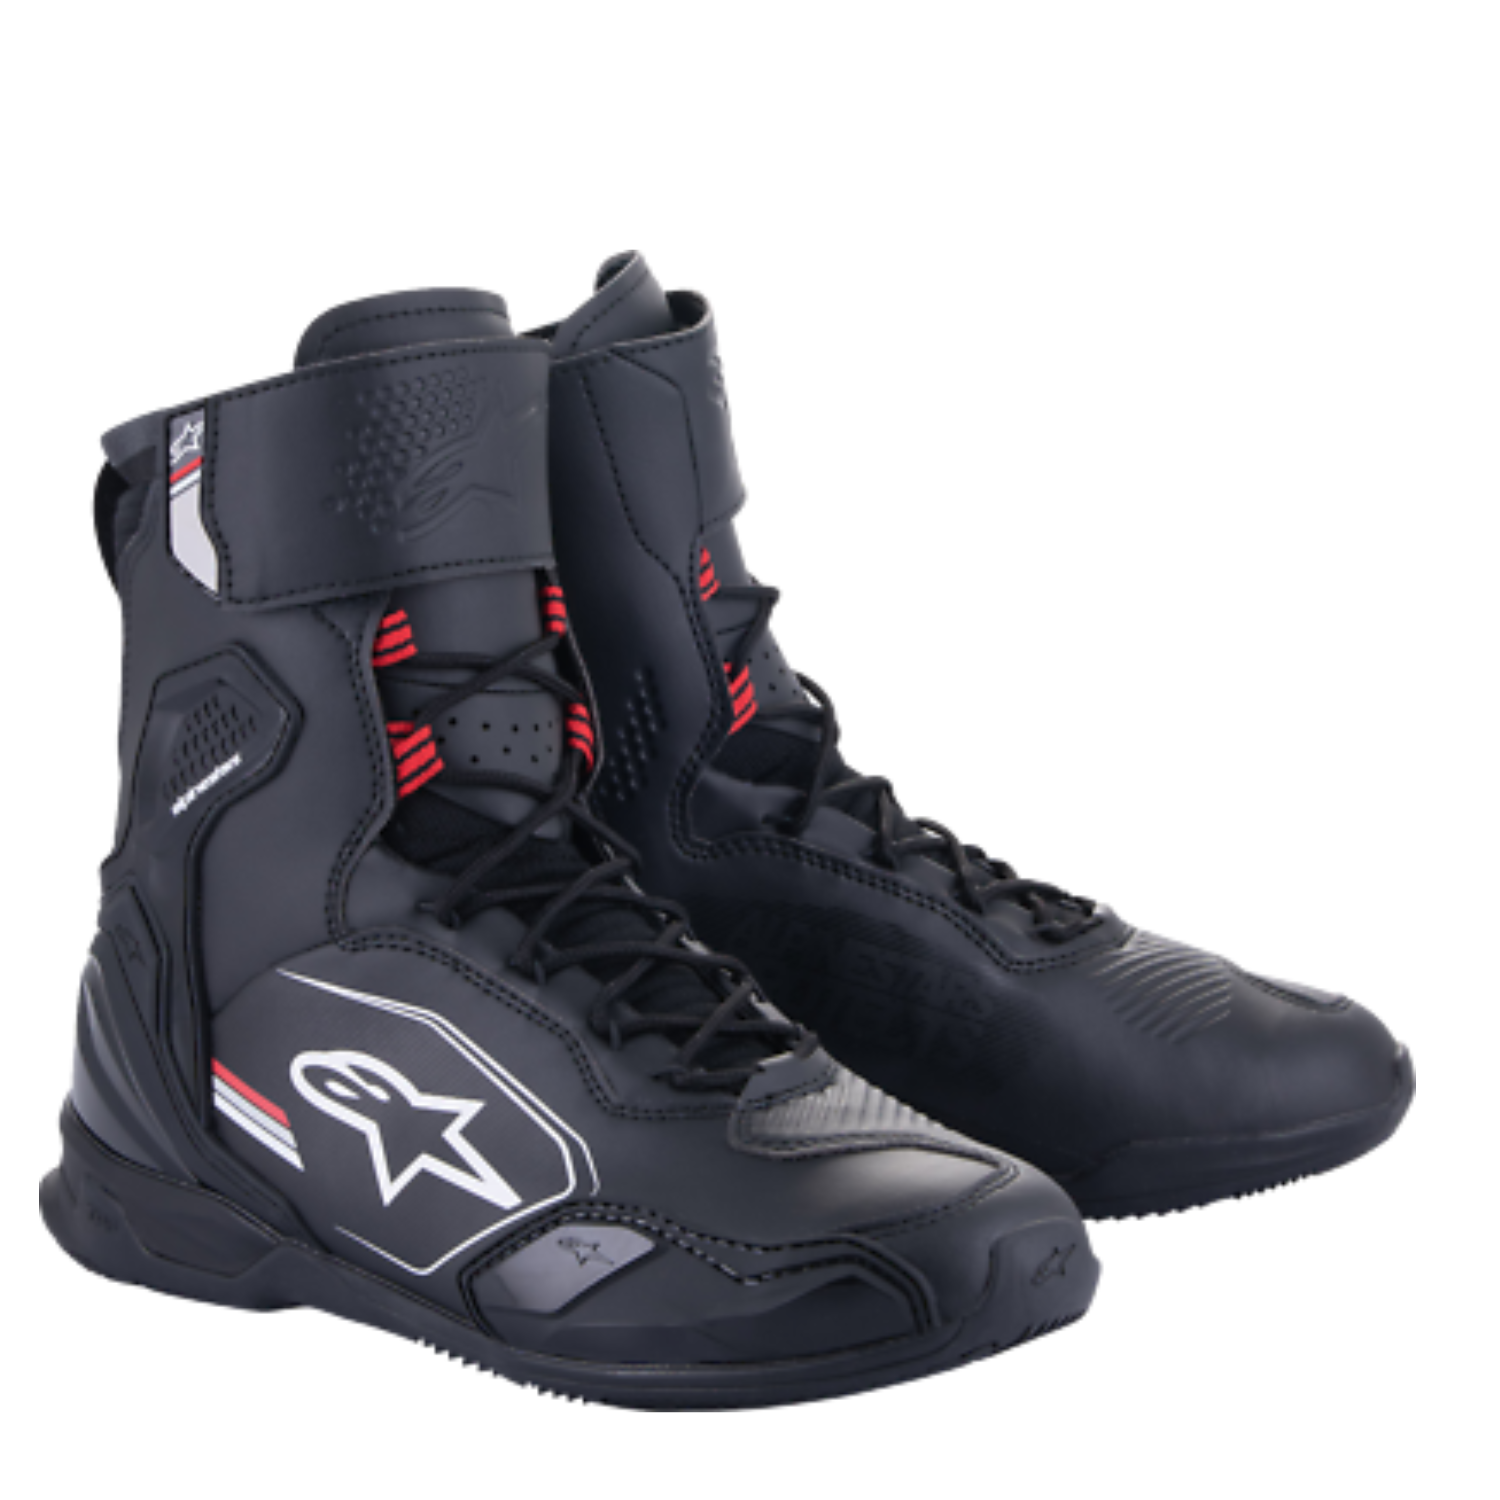 Image of Alpinestars Superfaster Shoes Black Gray Bright Red Size US 13 ID 8059347260877